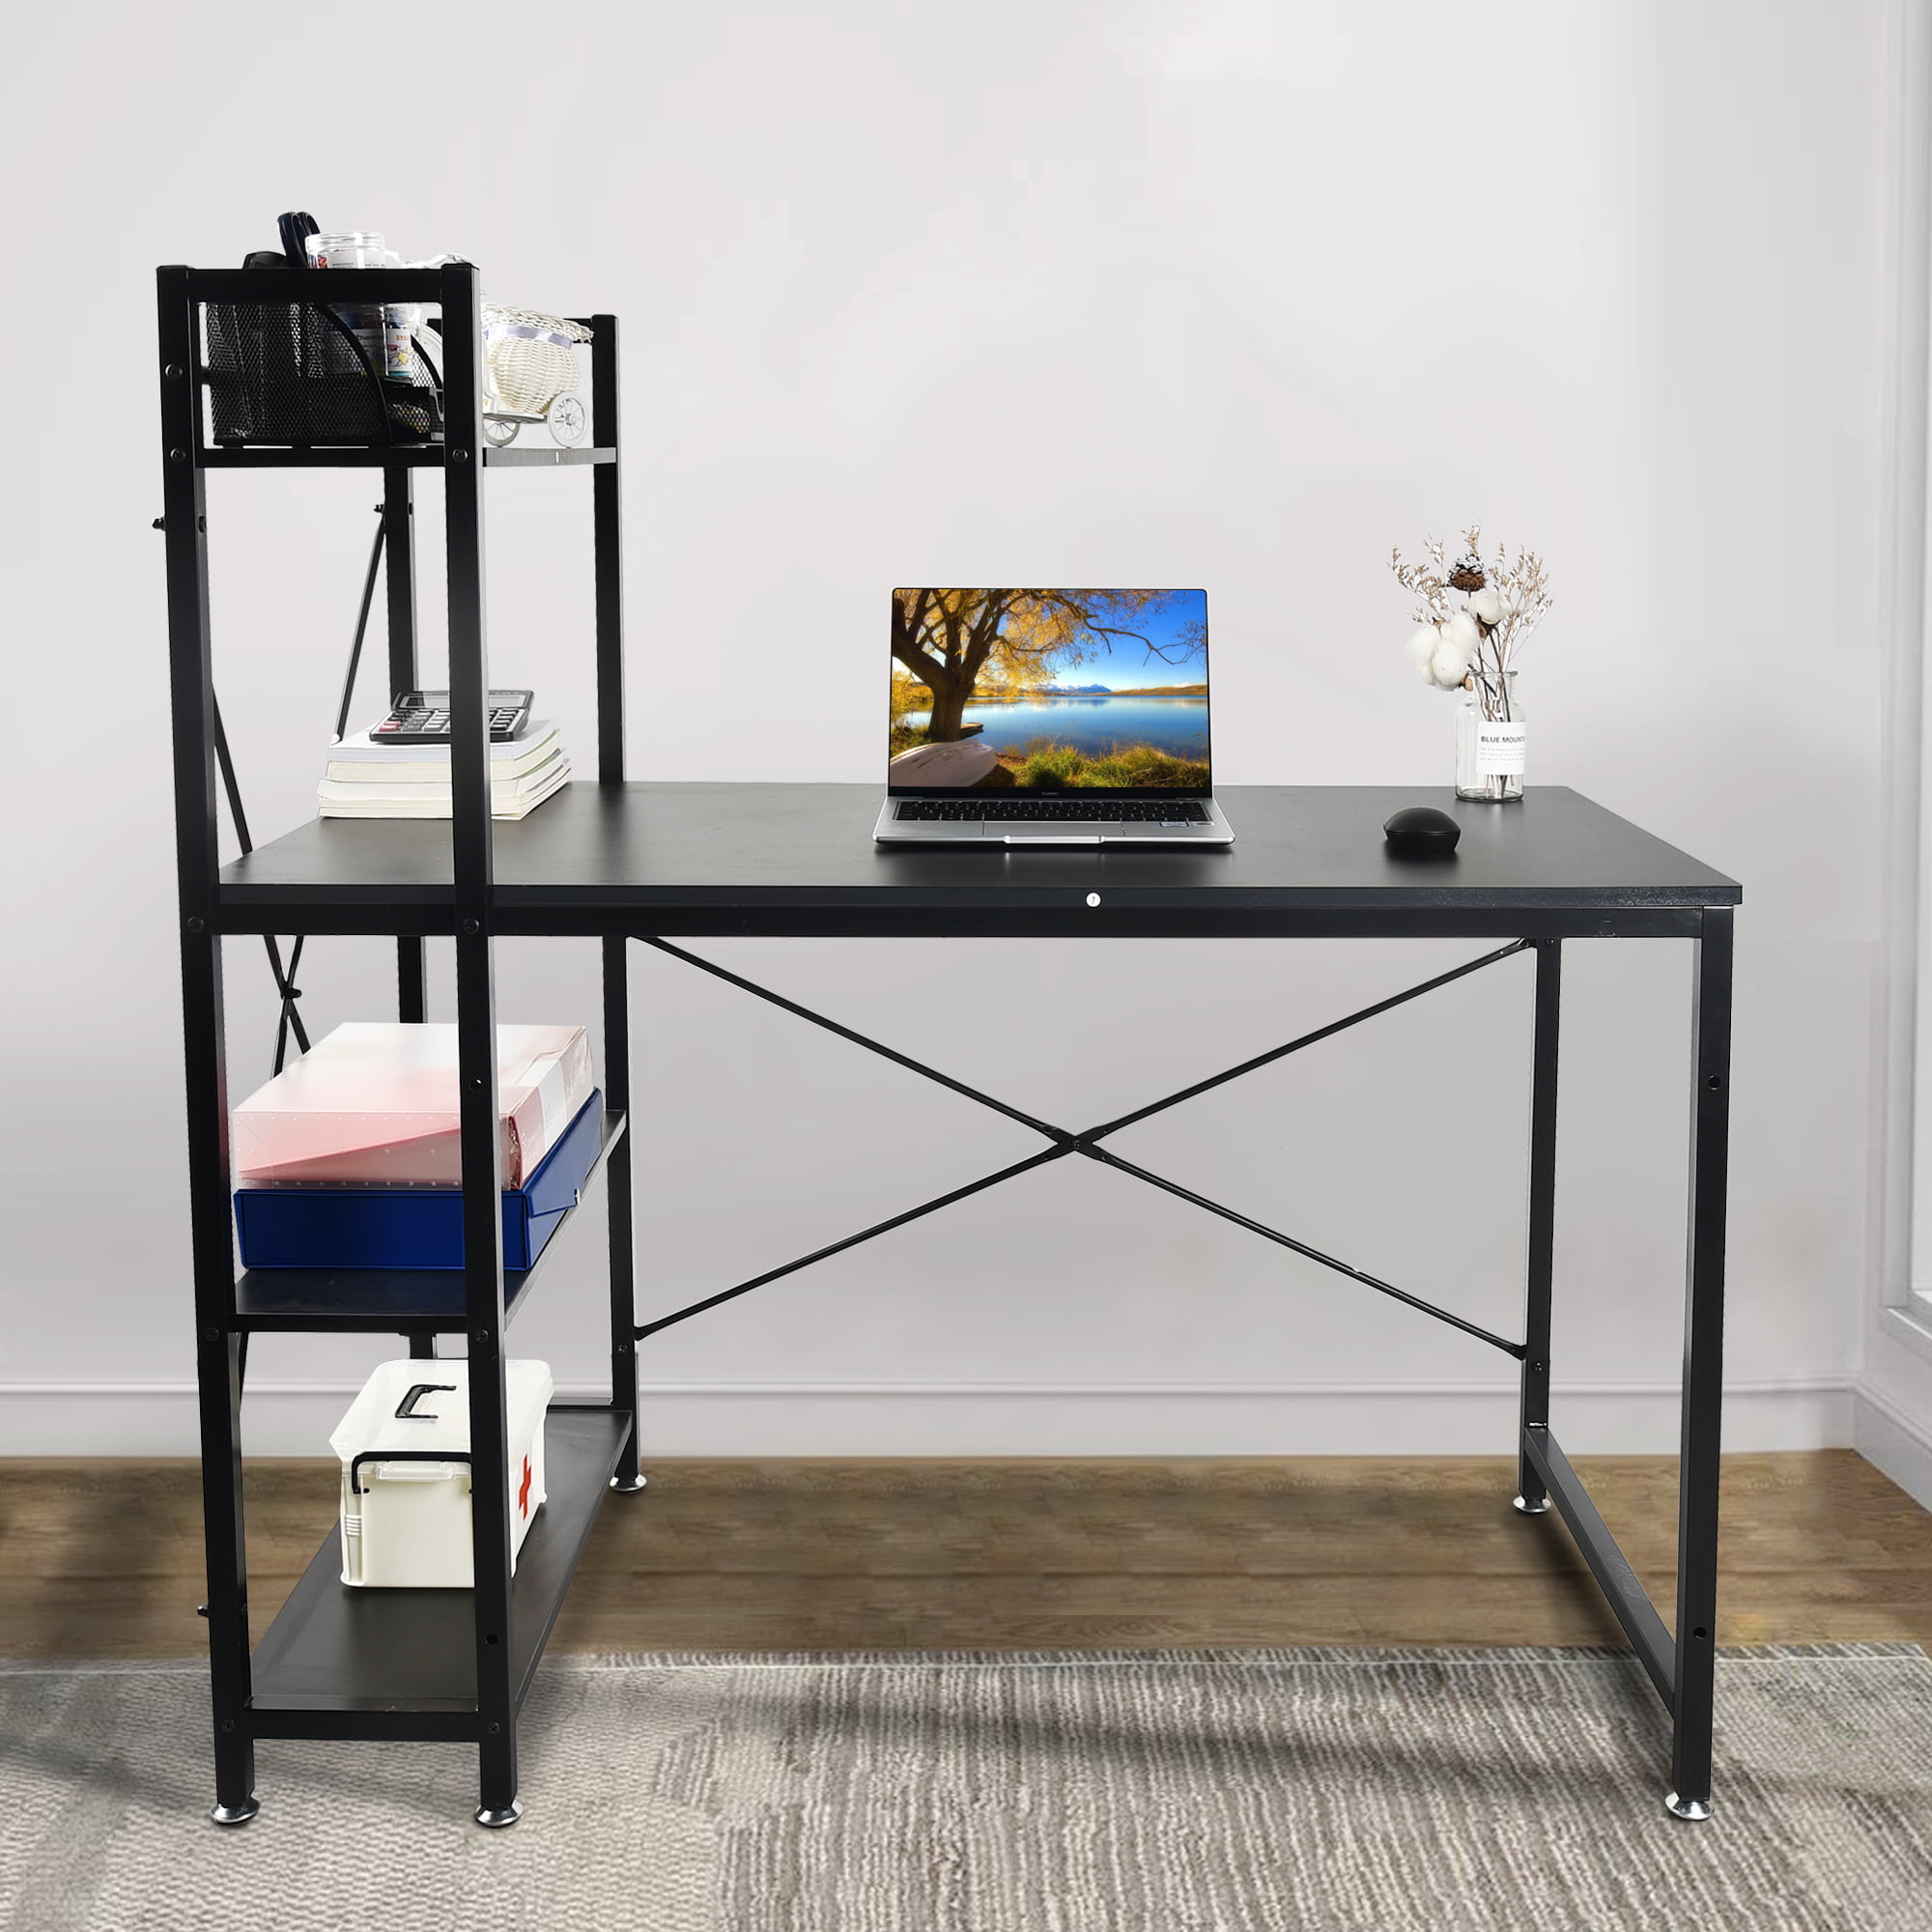 Details about   Modern Computer Desk PC Home Office Study Workstation Writing Table Furniture US 